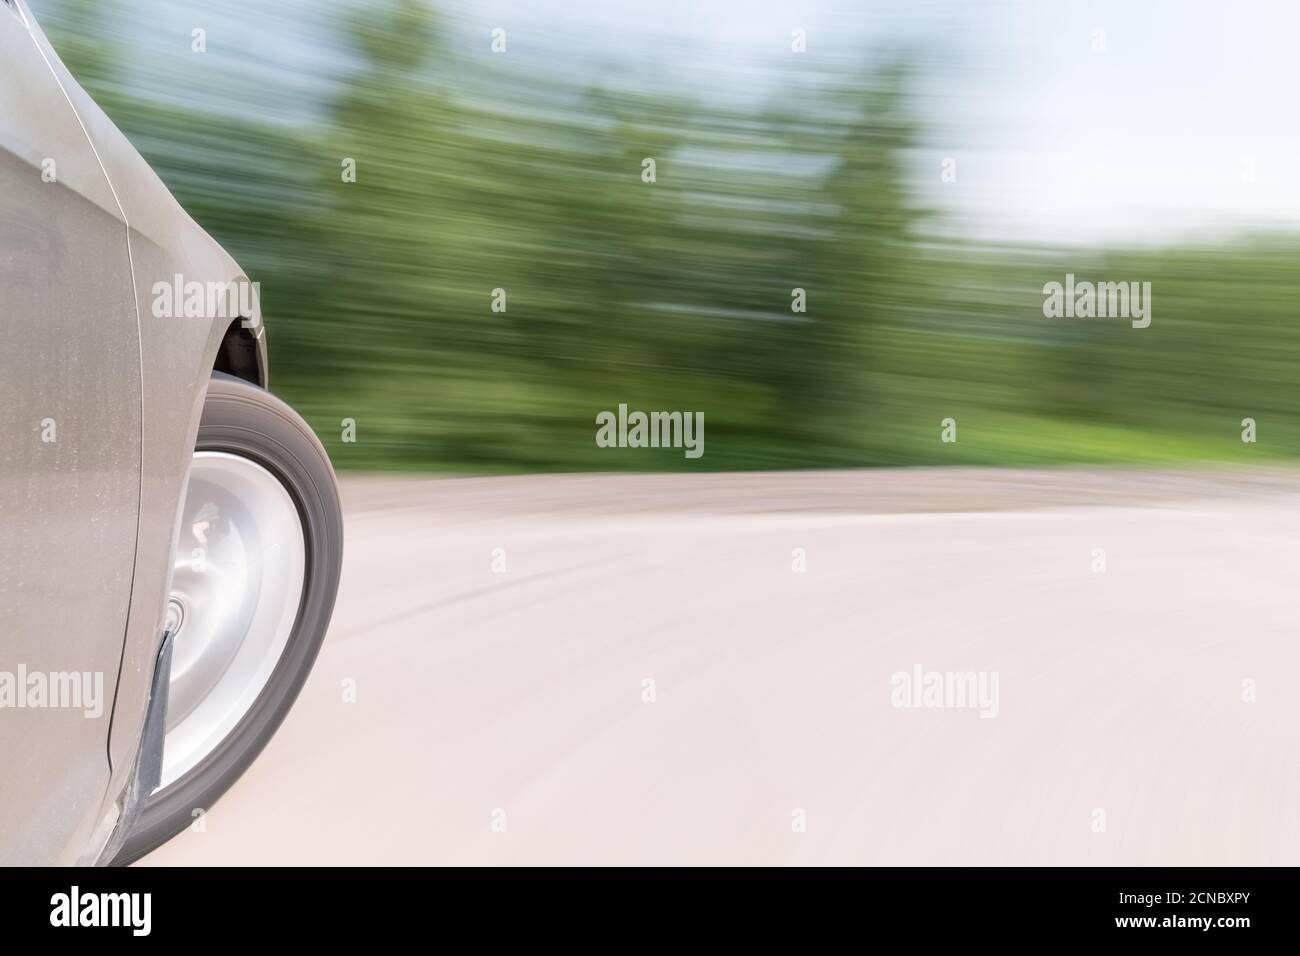 car swerving blurred background Stock Photo